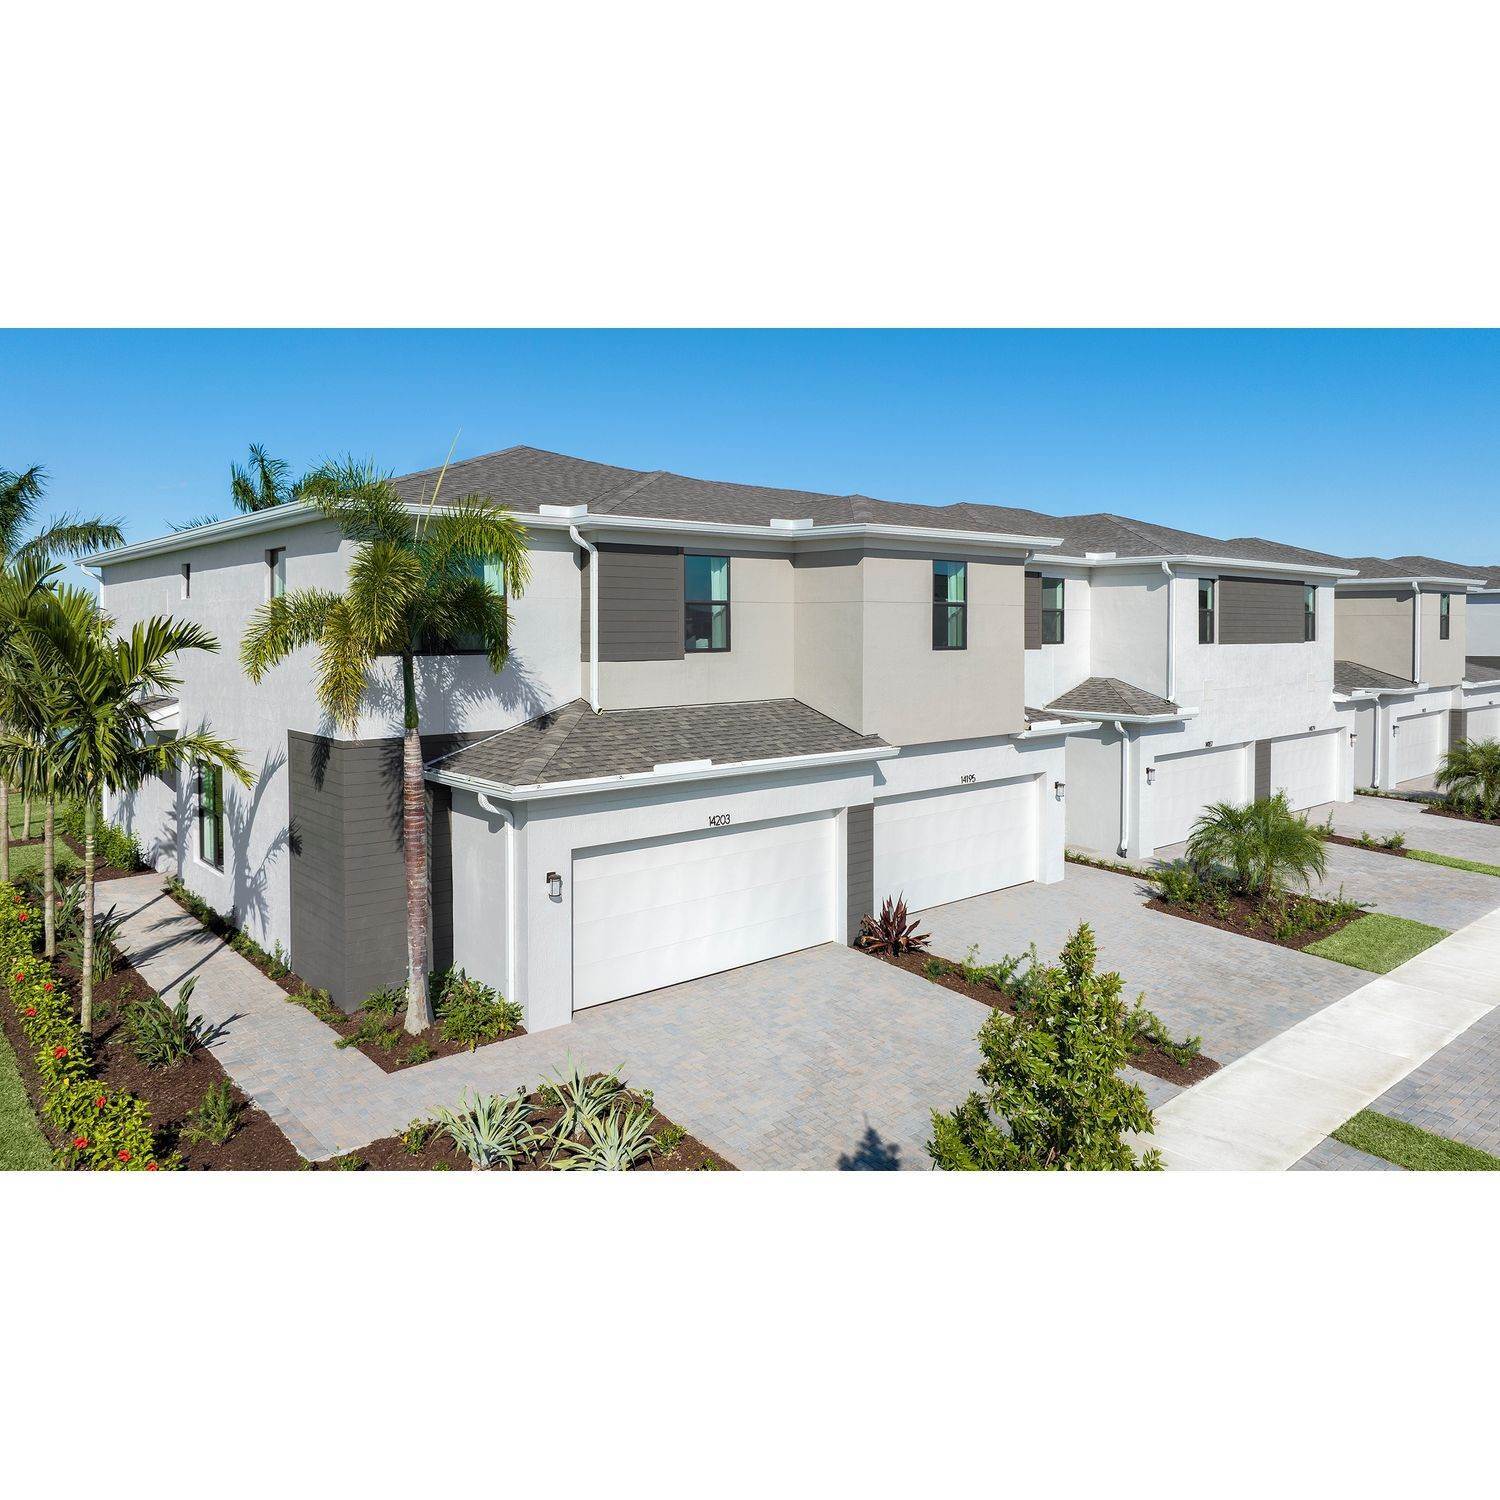 13. Tradition - Cadence - Townhomes building at 10455 SW Orana Drive, Port St. Lucie, FL 34987